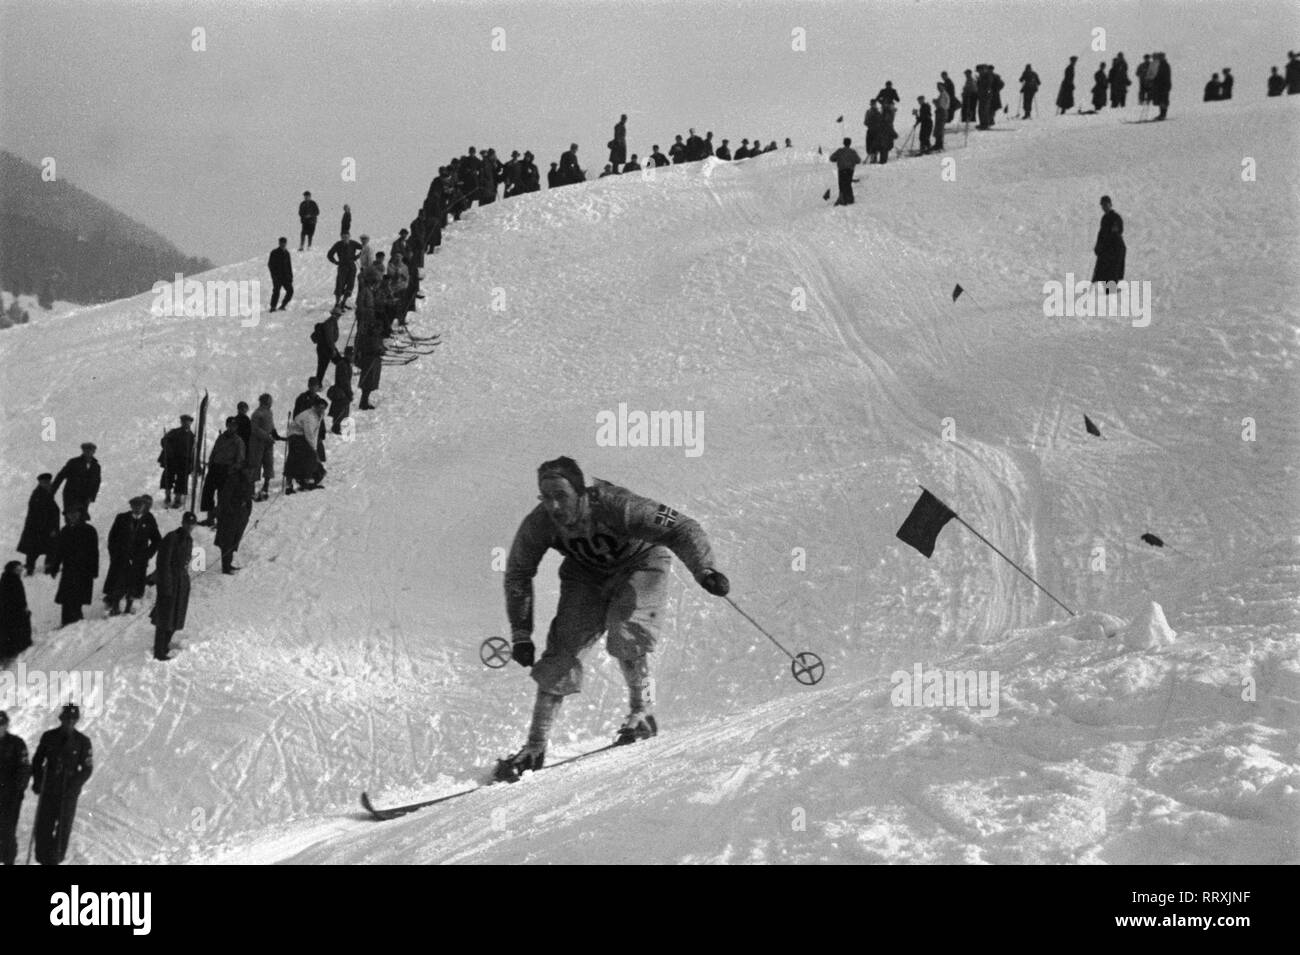 Winter Olympics 1936 - Germany, Third Reich - Olympic Winter Games, Winter  Olympics 1936 in Garmisch-Partenkirchen. Ski Alpine - Men downhill racing  at Kreuzeck. Image date February 1936. Photo Erich Andres Stock Photo -  Alamy